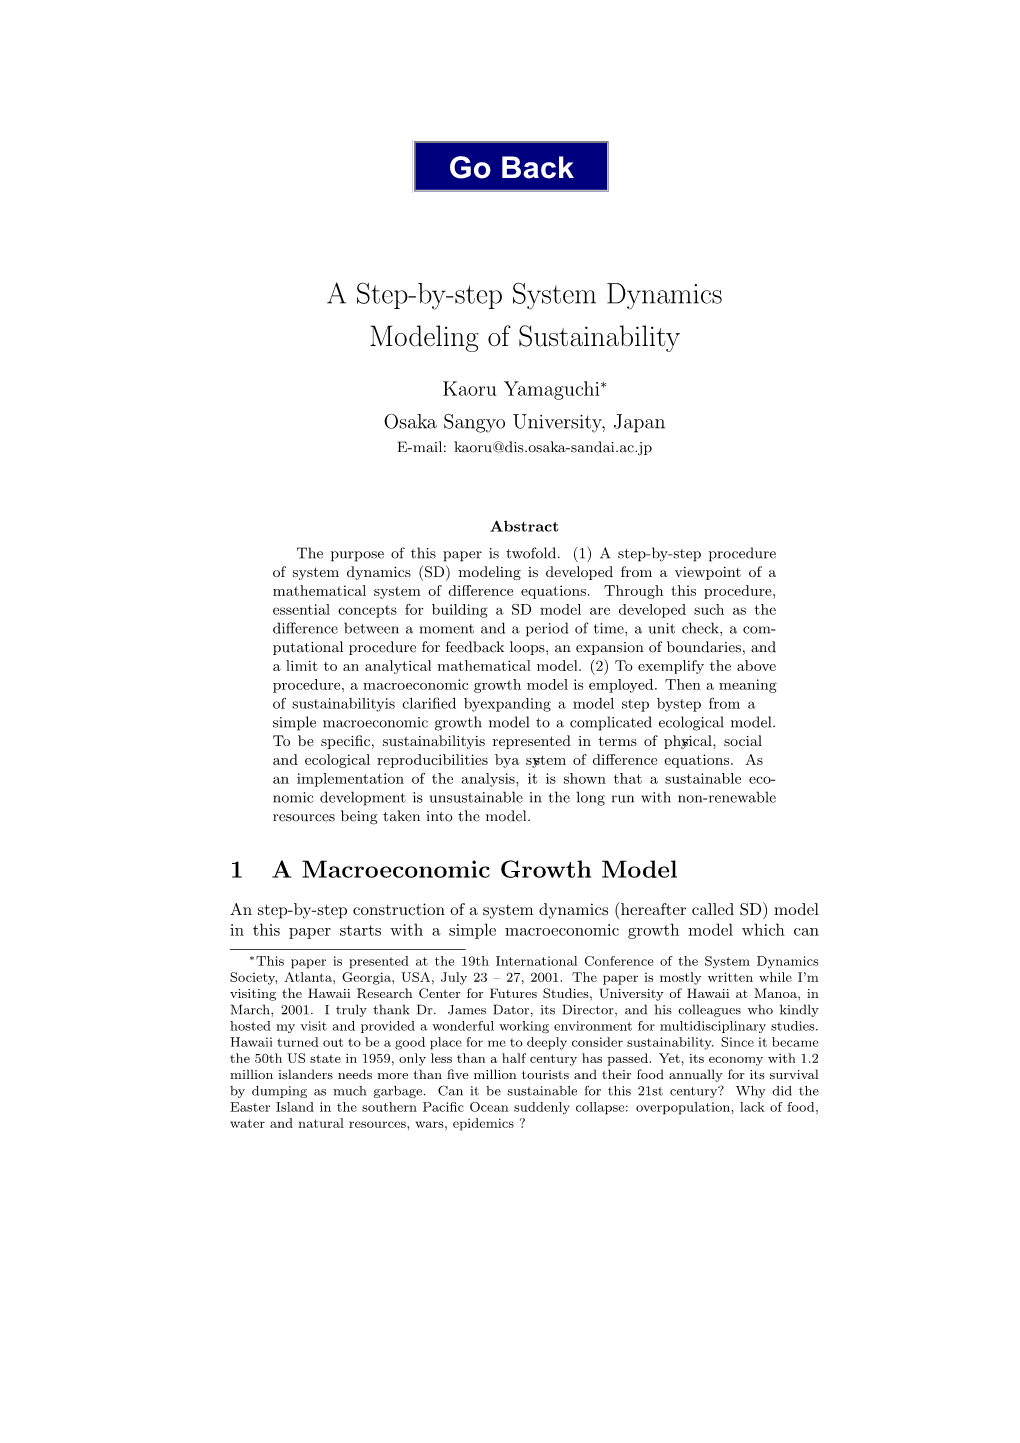 A Step-By-Step System Dynamics Modeling of Sustainability